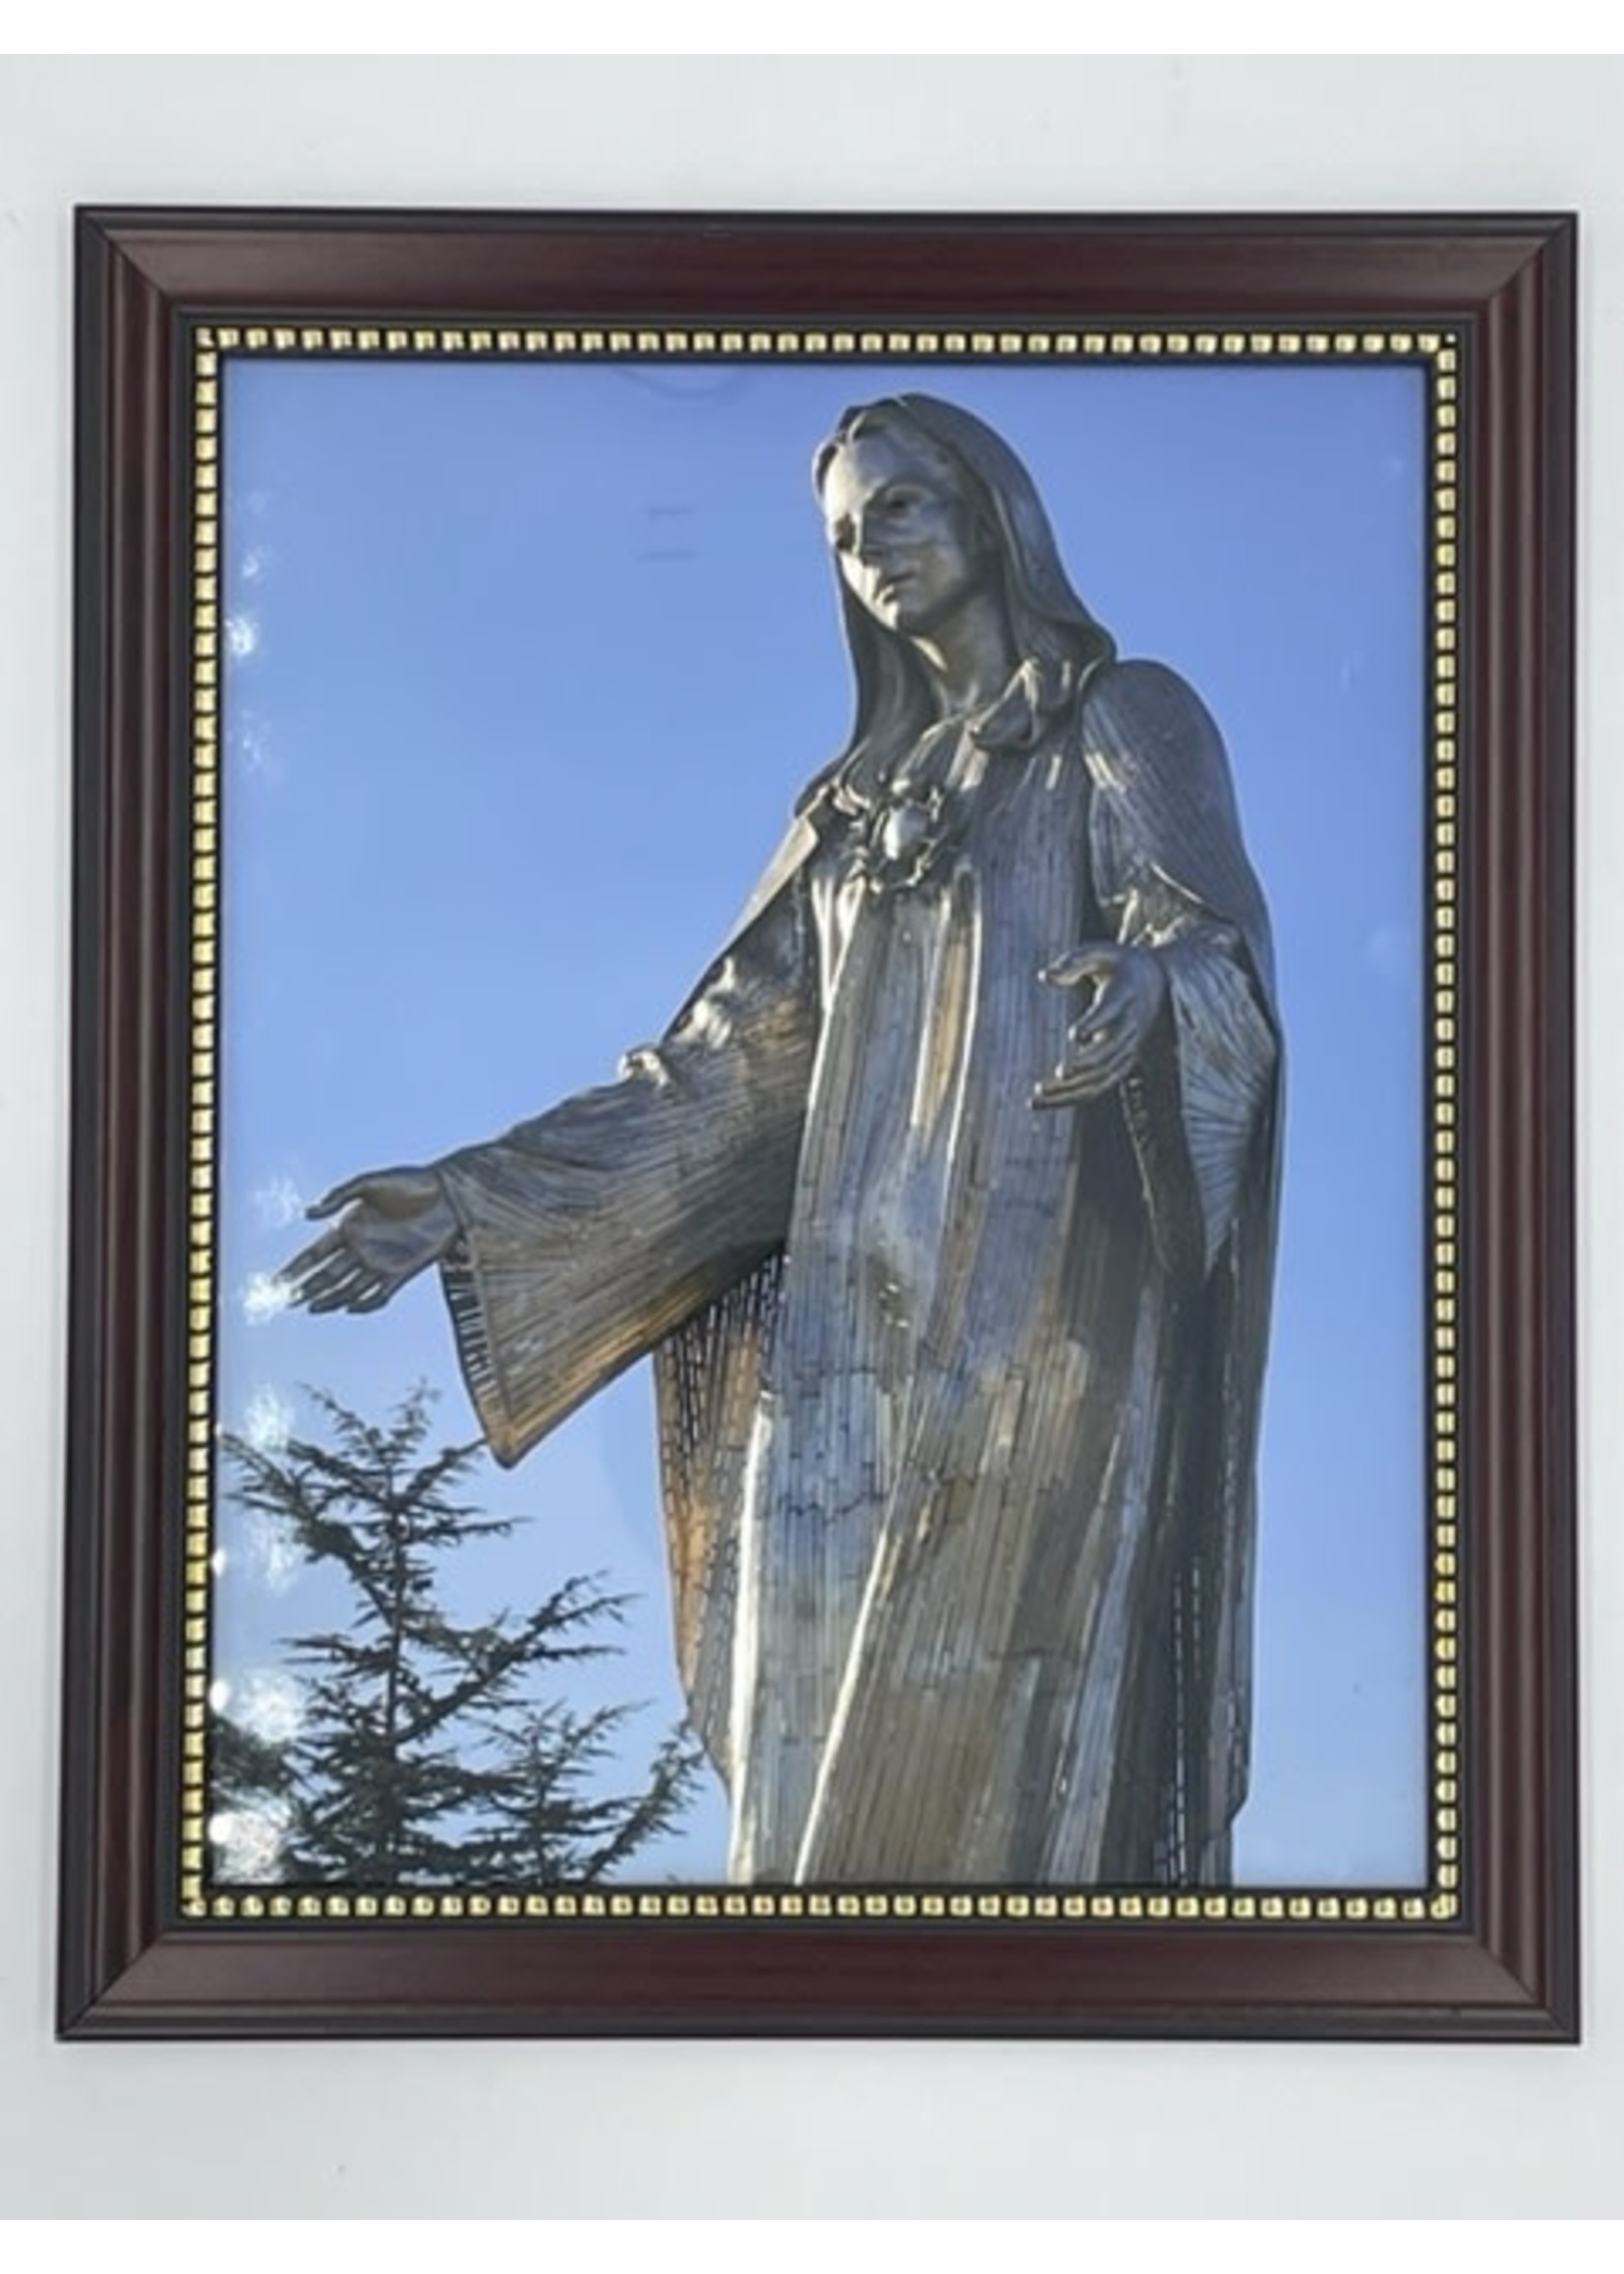 Our Lady of Peace Framed Photo Print - 9.5" x 11.5"